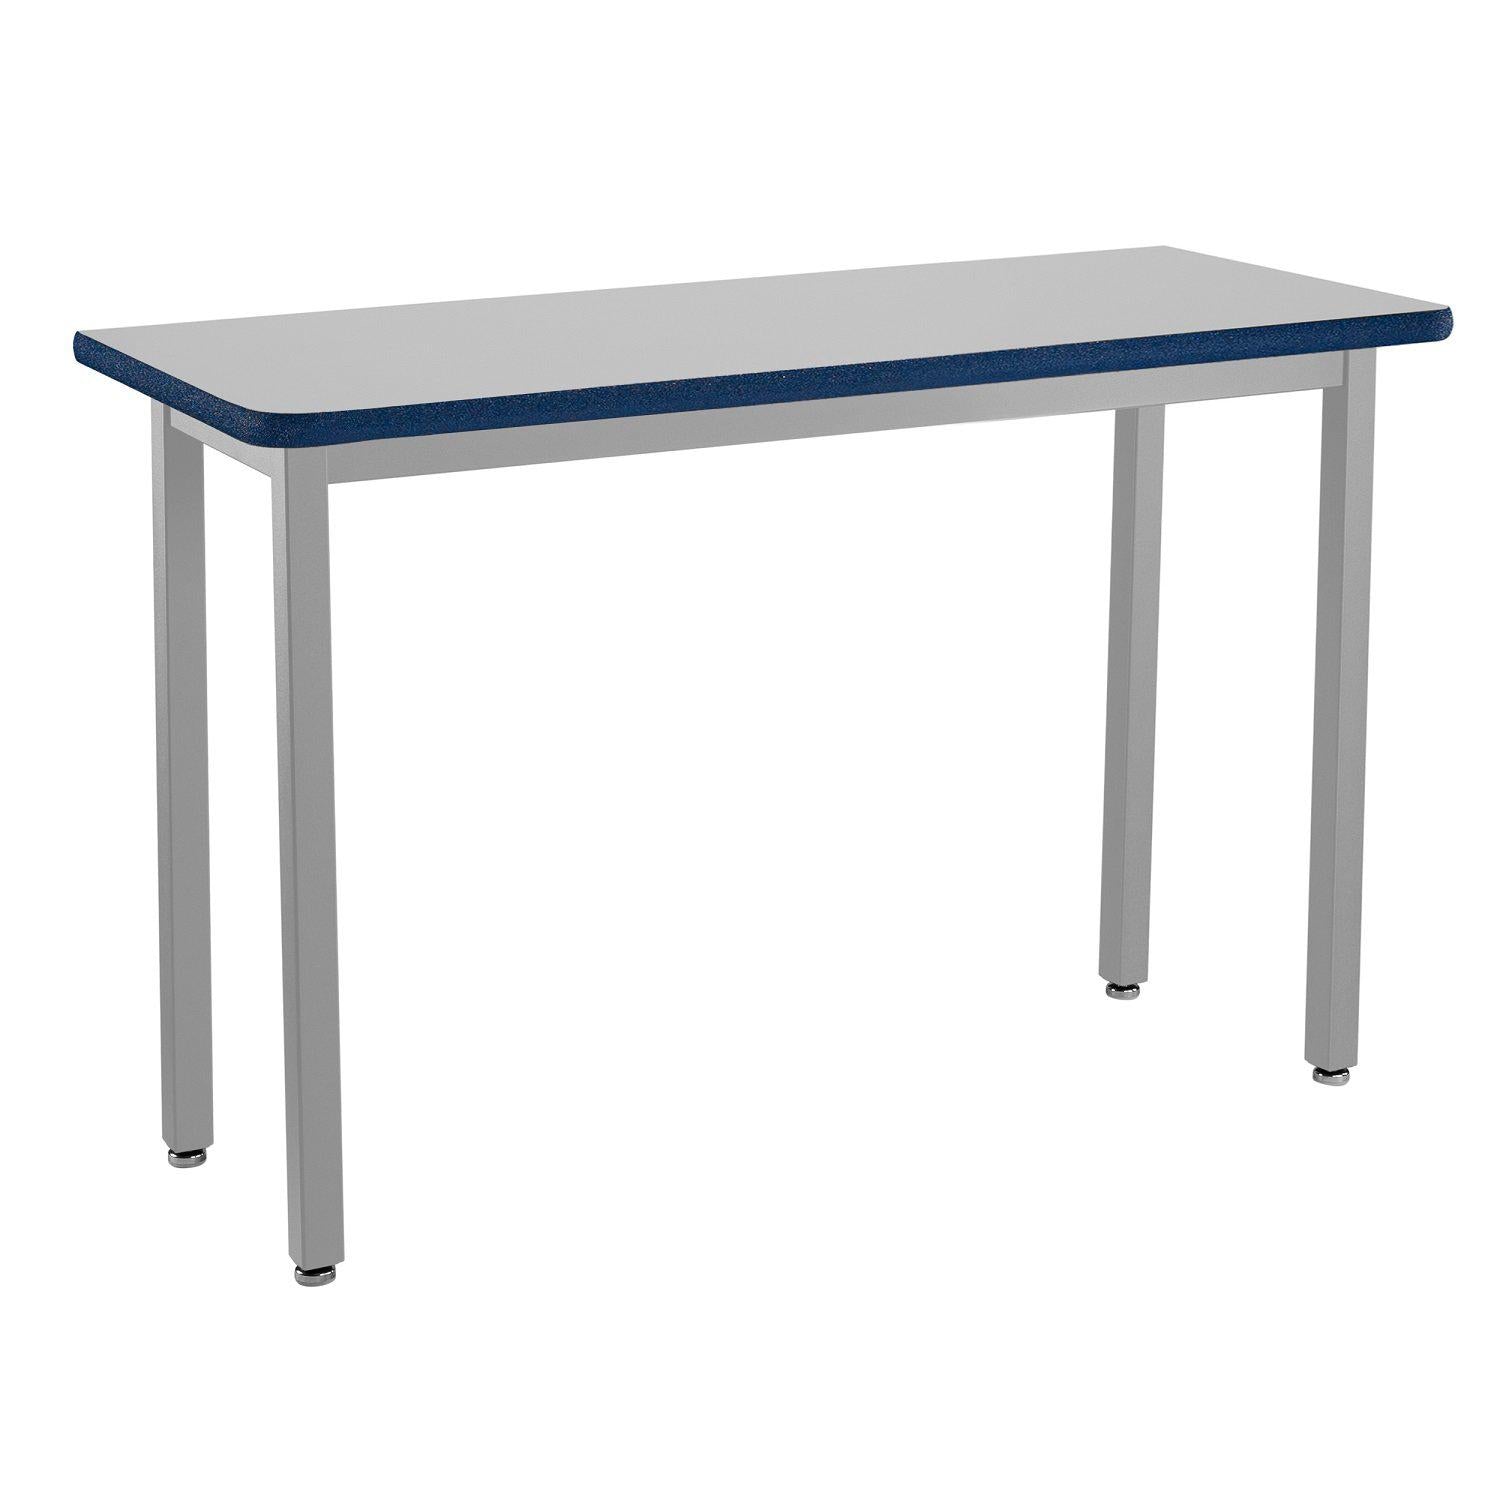 Heavy-Duty Fixed Height Utility Table, Soft Grey Frame, 18" x 60", Supreme High-Pressure Laminate Top with Black ProtectEdge